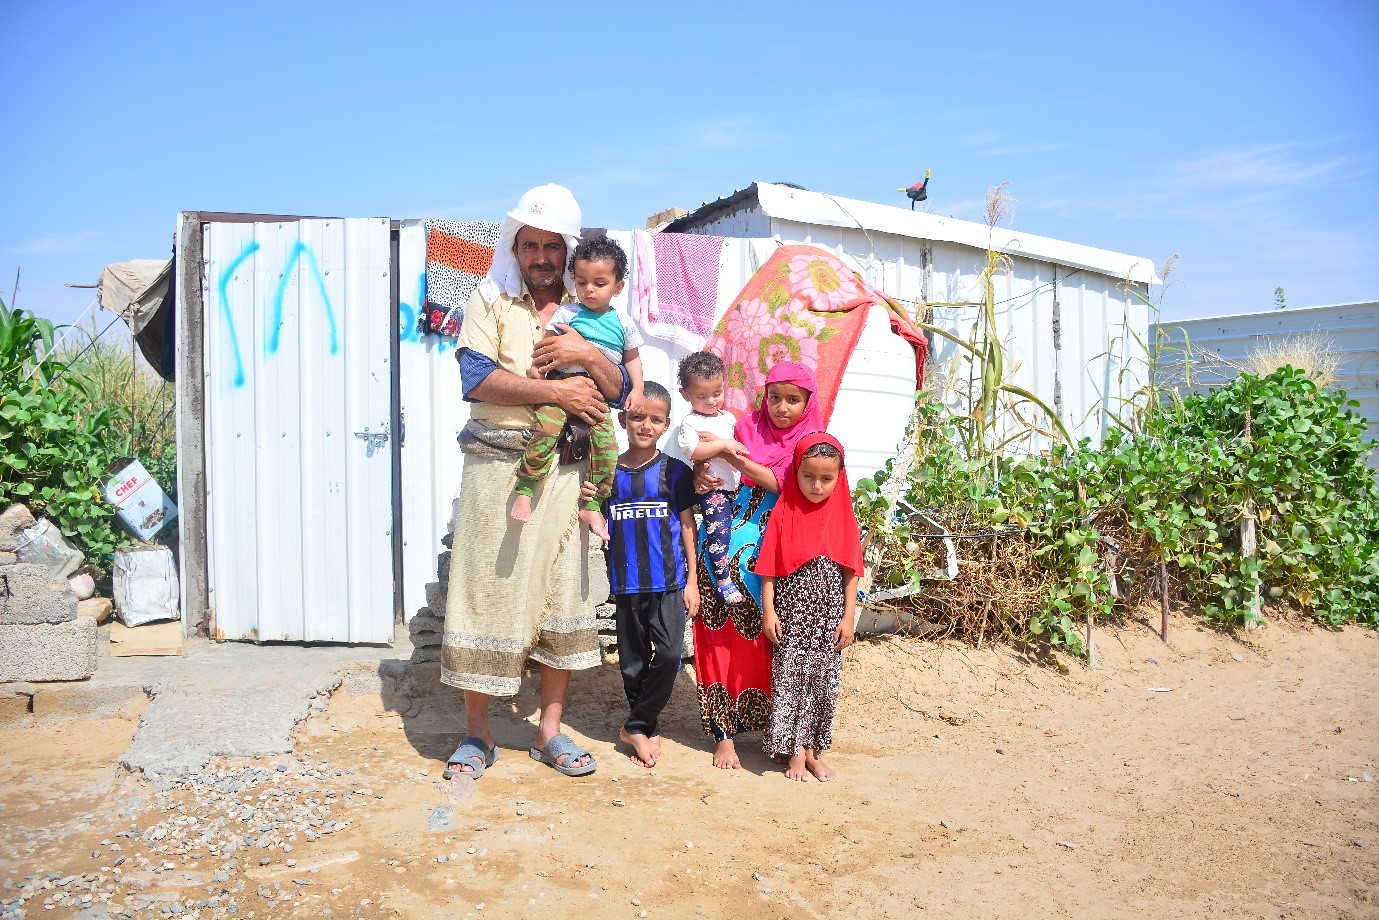 A man holding a child and standing in front of a white shed with other kids standing beside him